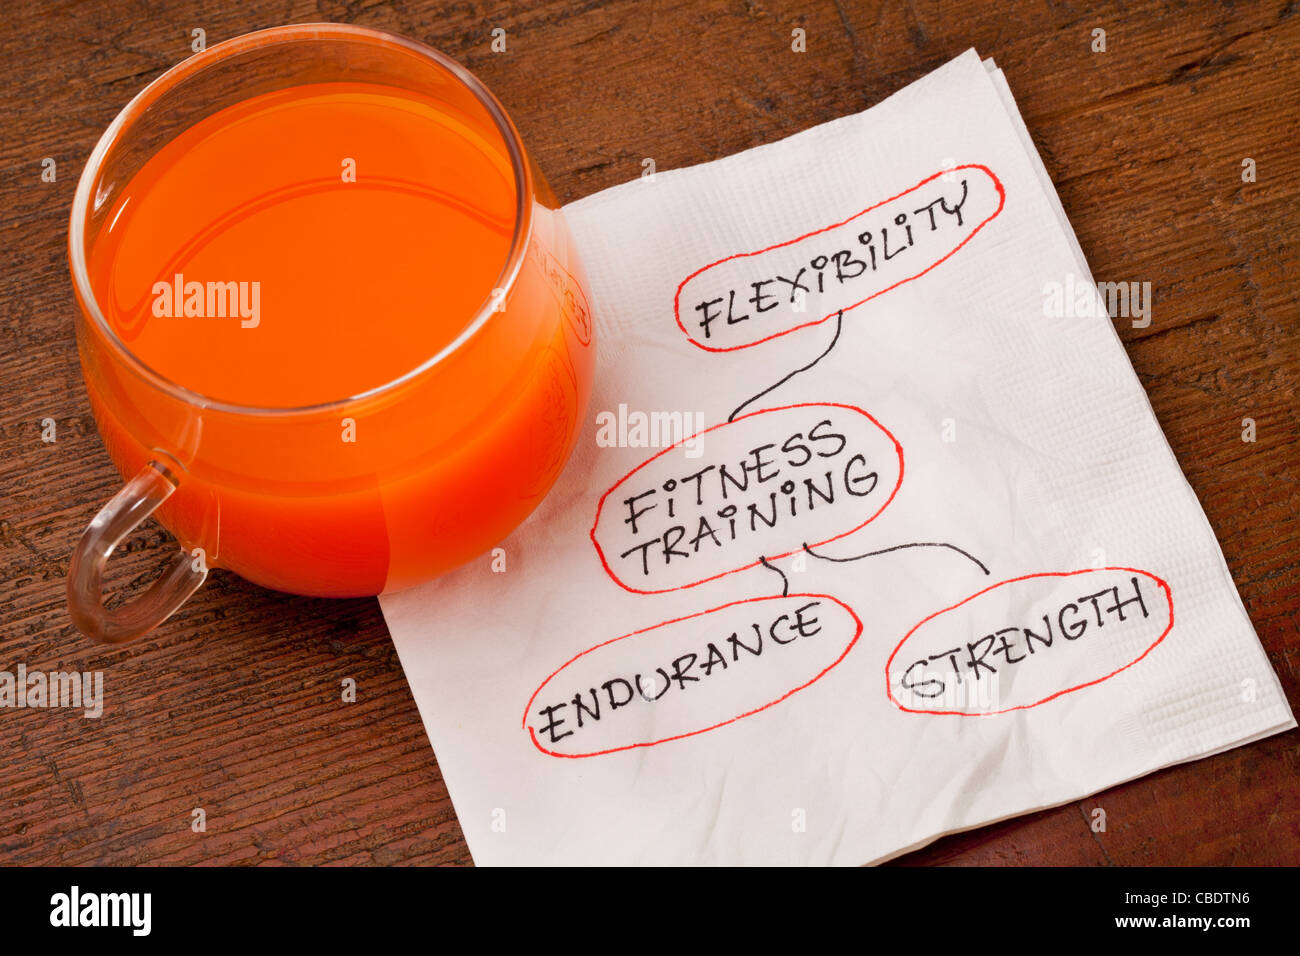 health concept - fitness training - napkin doodle with a glass cup of carrot juice Stock Photo